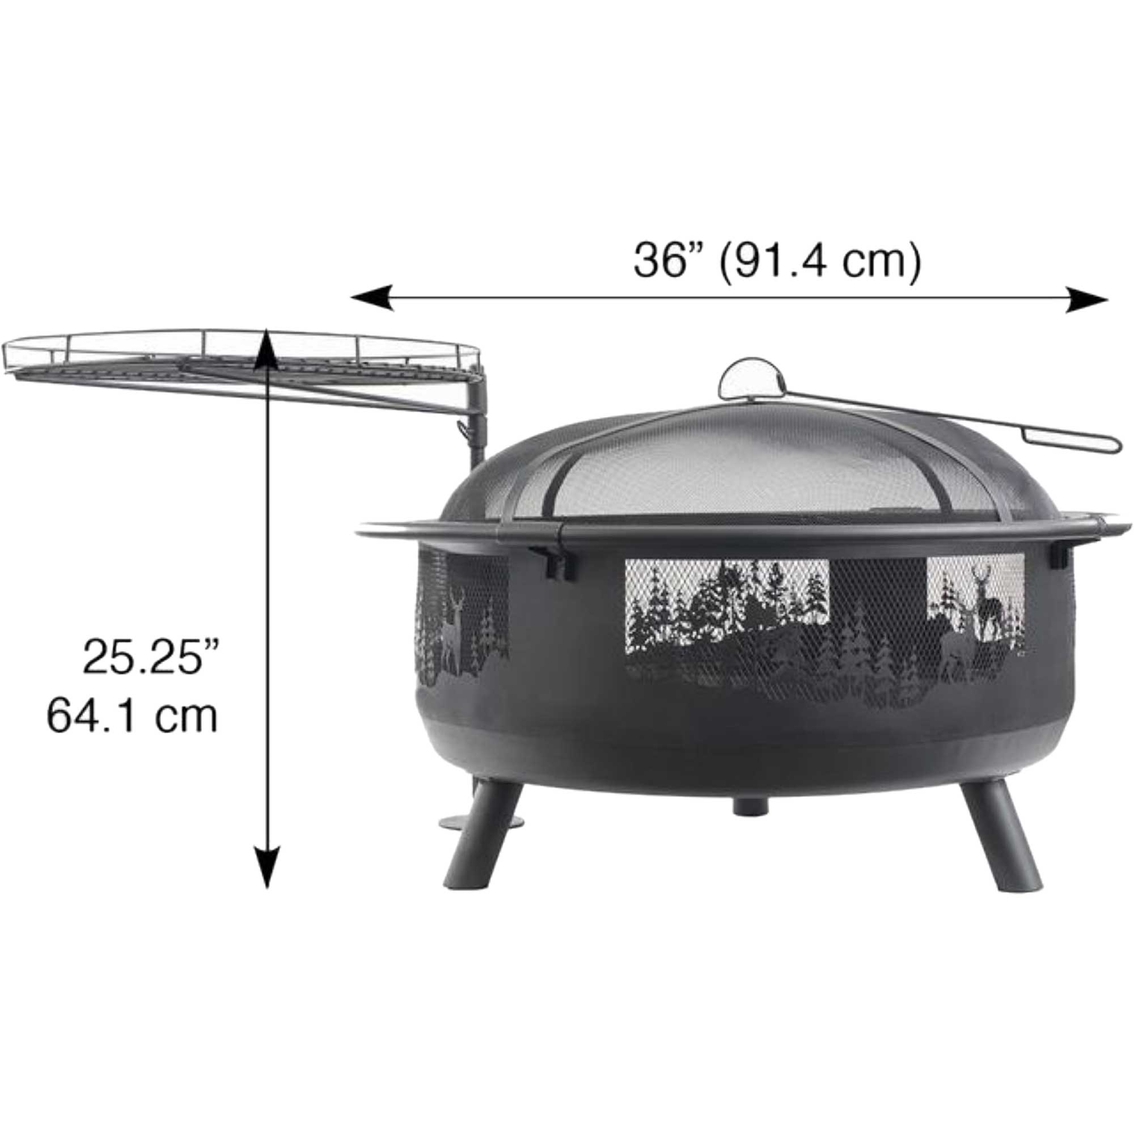 Blue Sky Outdoor Living 36 in. Round Barrel Fire Pit with Swing Away Grill - Image 3 of 4